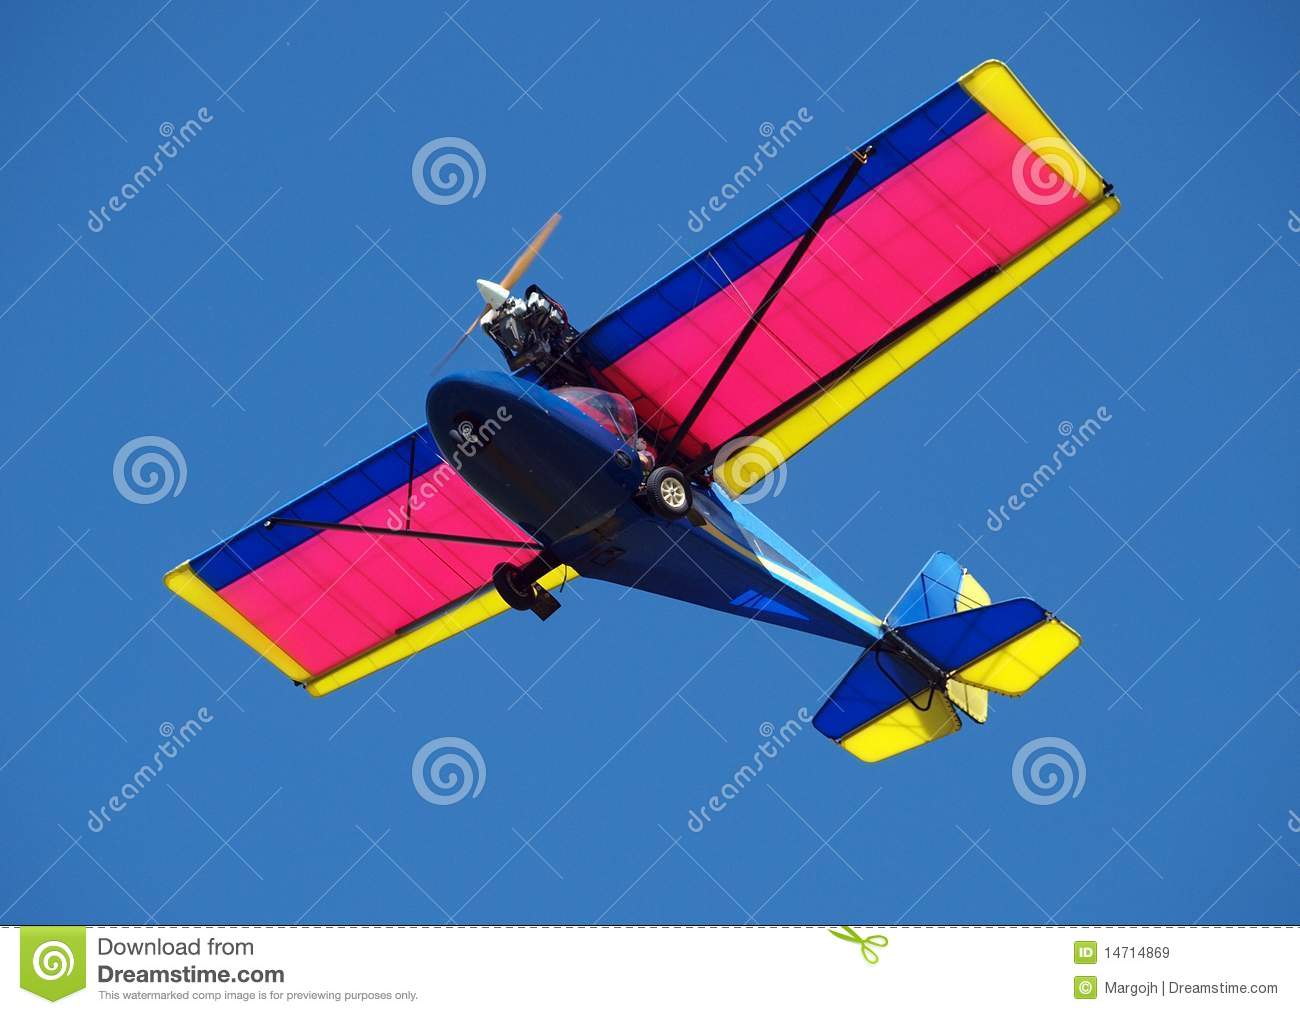 Microlight Plane Royalty Free Stock Images.